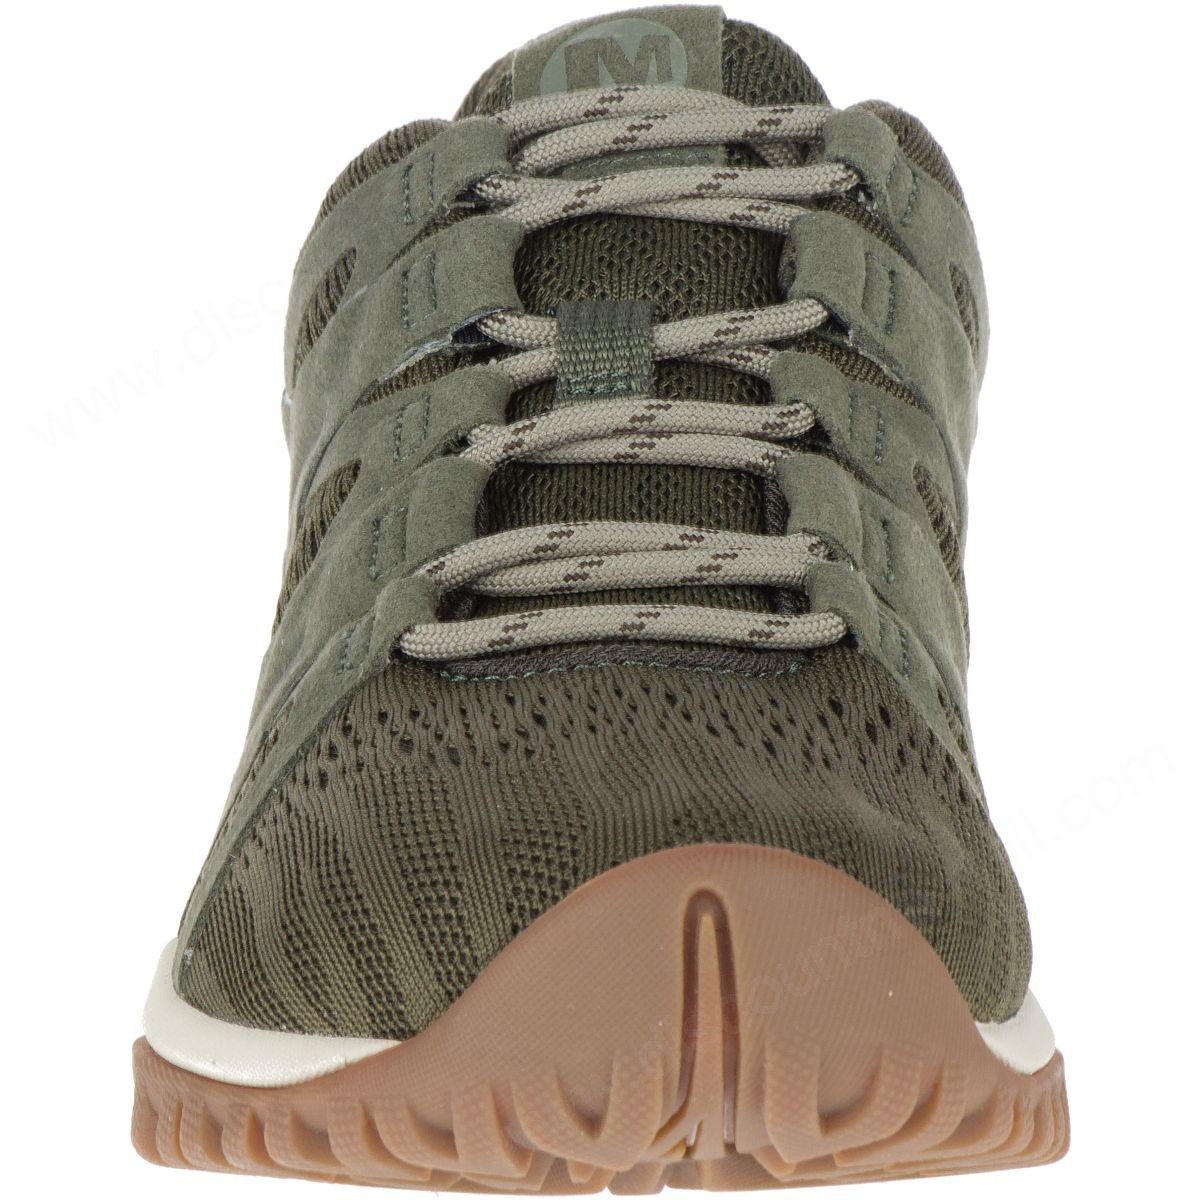 Merrell Lady's Siren Guided Lace Q2 Dusty Olive - -4